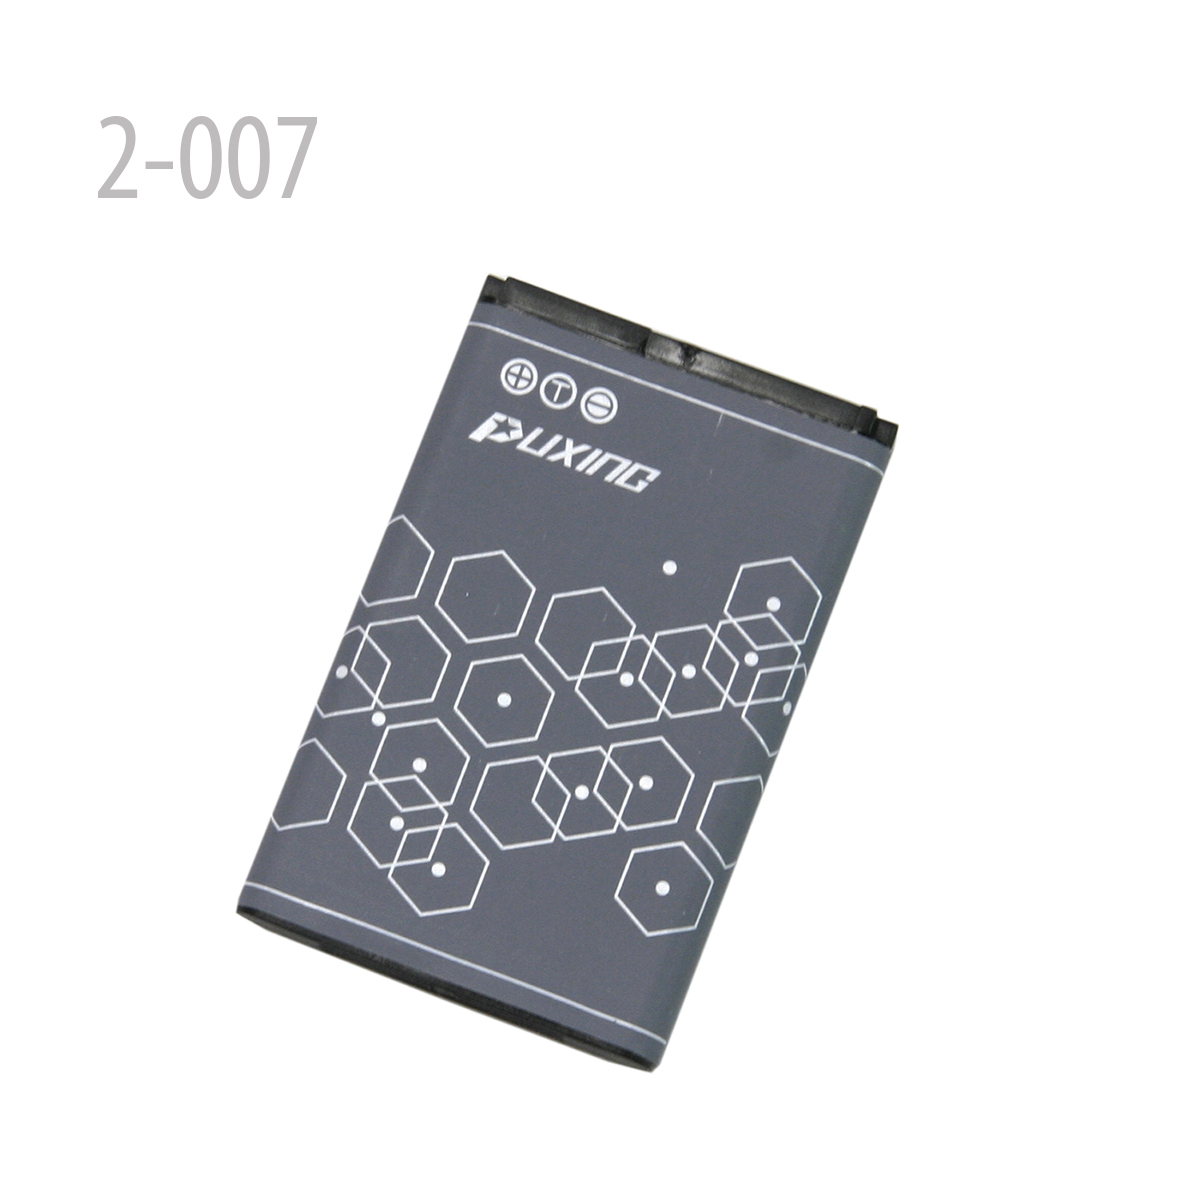 Px2r battery